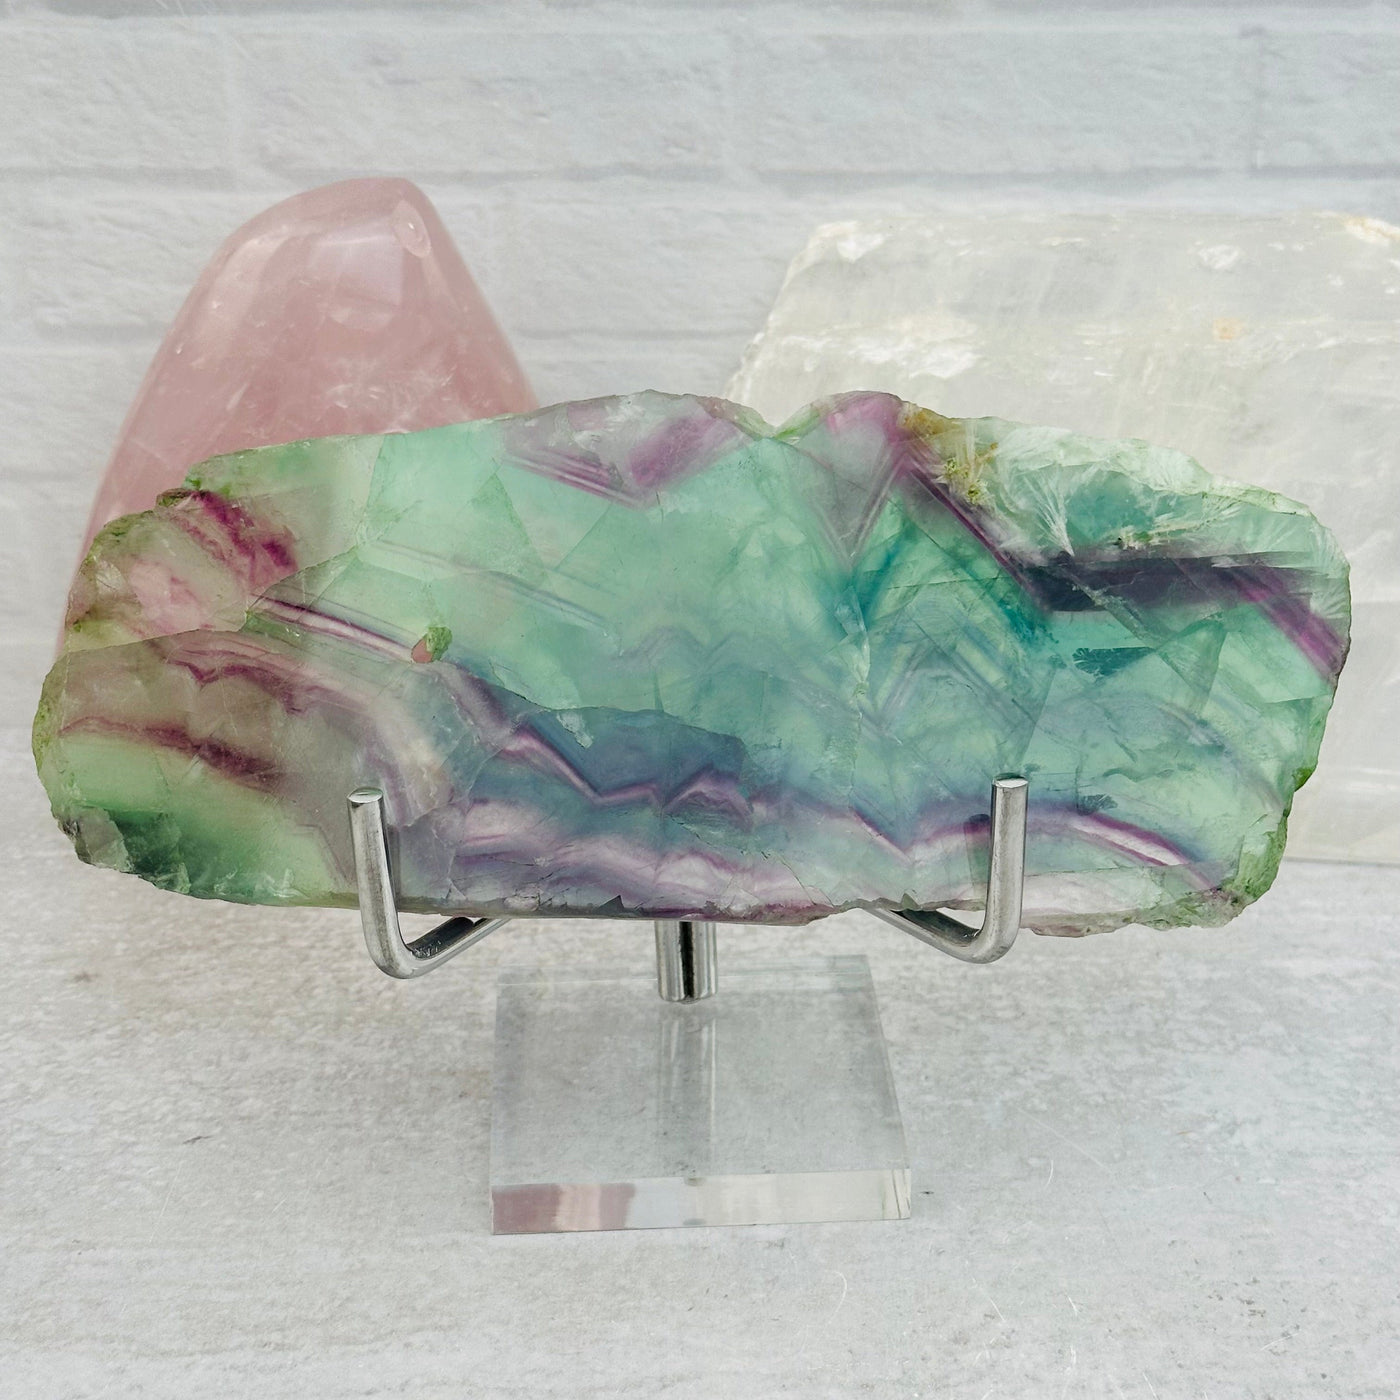 Natural Feather Fluorite Crystal Slab displayed as home decor